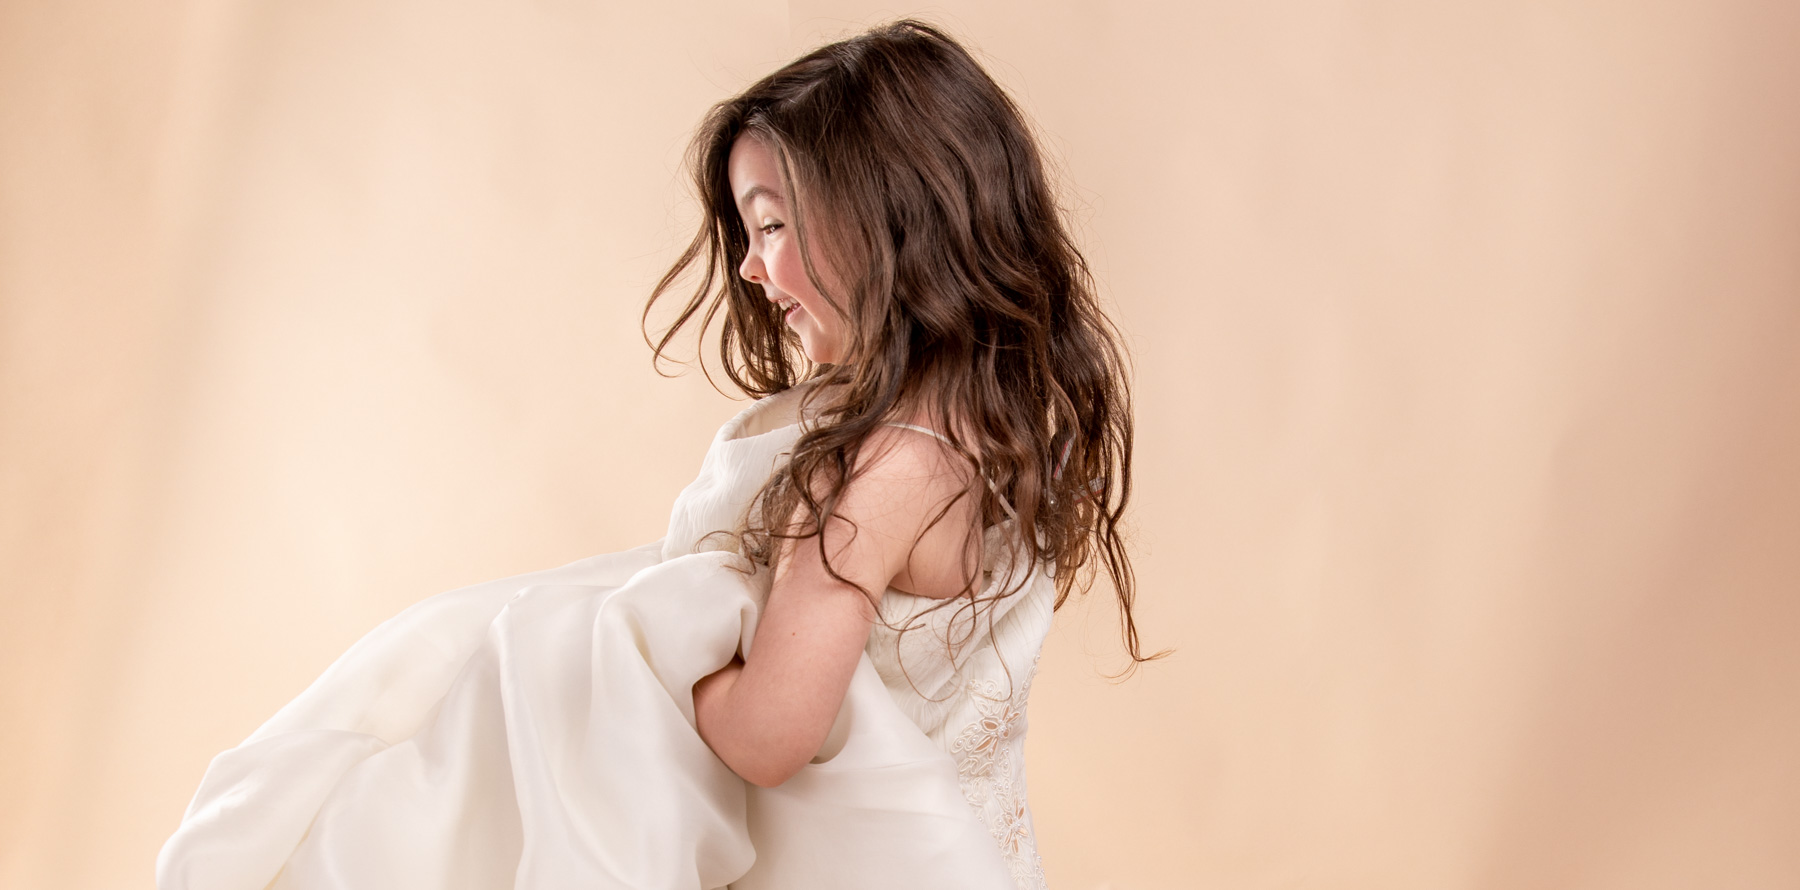 young girl in her mothers wedding dress on a cream studio background